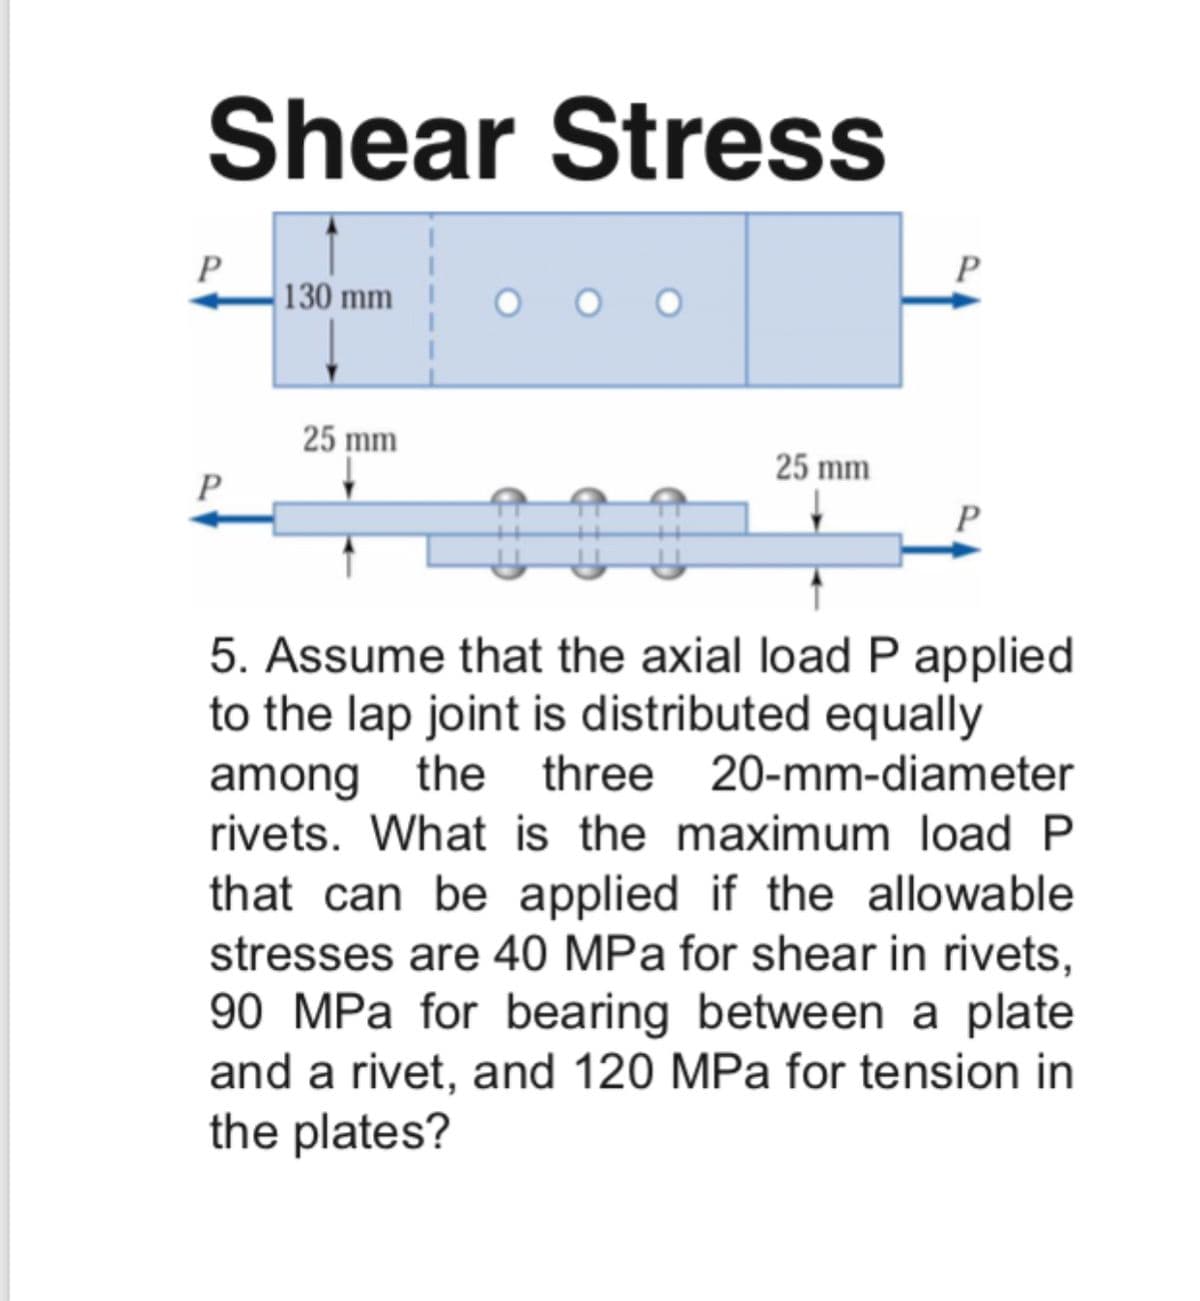 Shear Stress
P
130 mm
P
O O O
25 mm
25 mm
P
5. Assume that the axial load P applied
to the lap joint is distributed equally
among the three 20-mm-diameter
rivets. What is the maximum load P
that can be applied if the allowable
stresses are 40 MPa for shear in rivets,
90 MPa for bearing between a plate
and a rivet, and 120 MPa for tension in
the plates?
